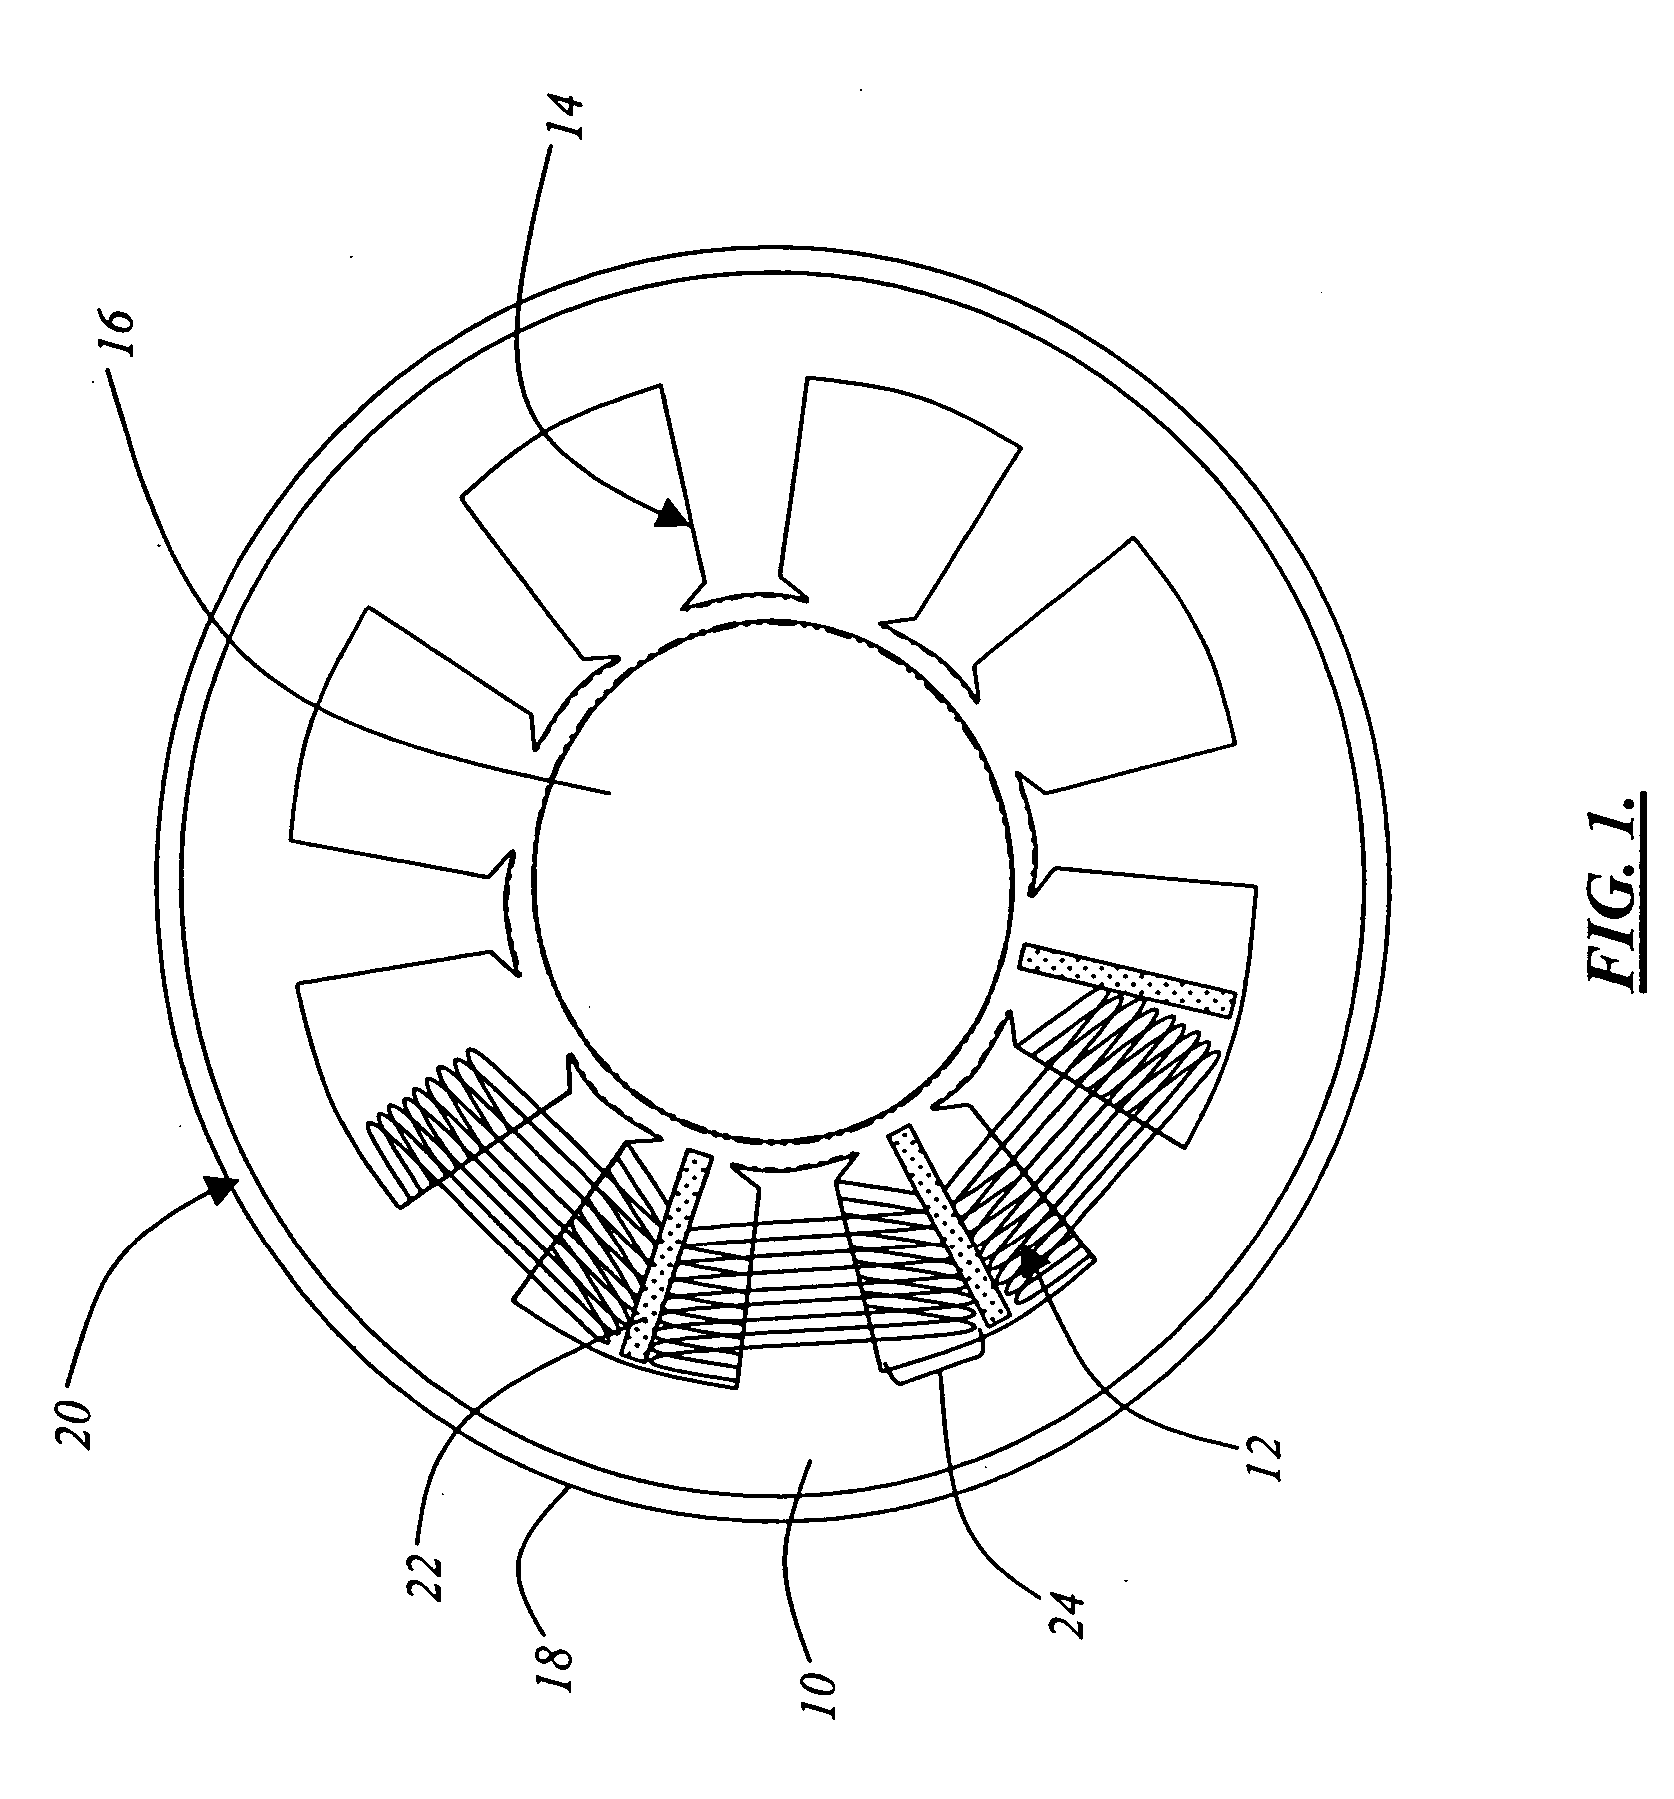 Methods and systems for electric machines having windings